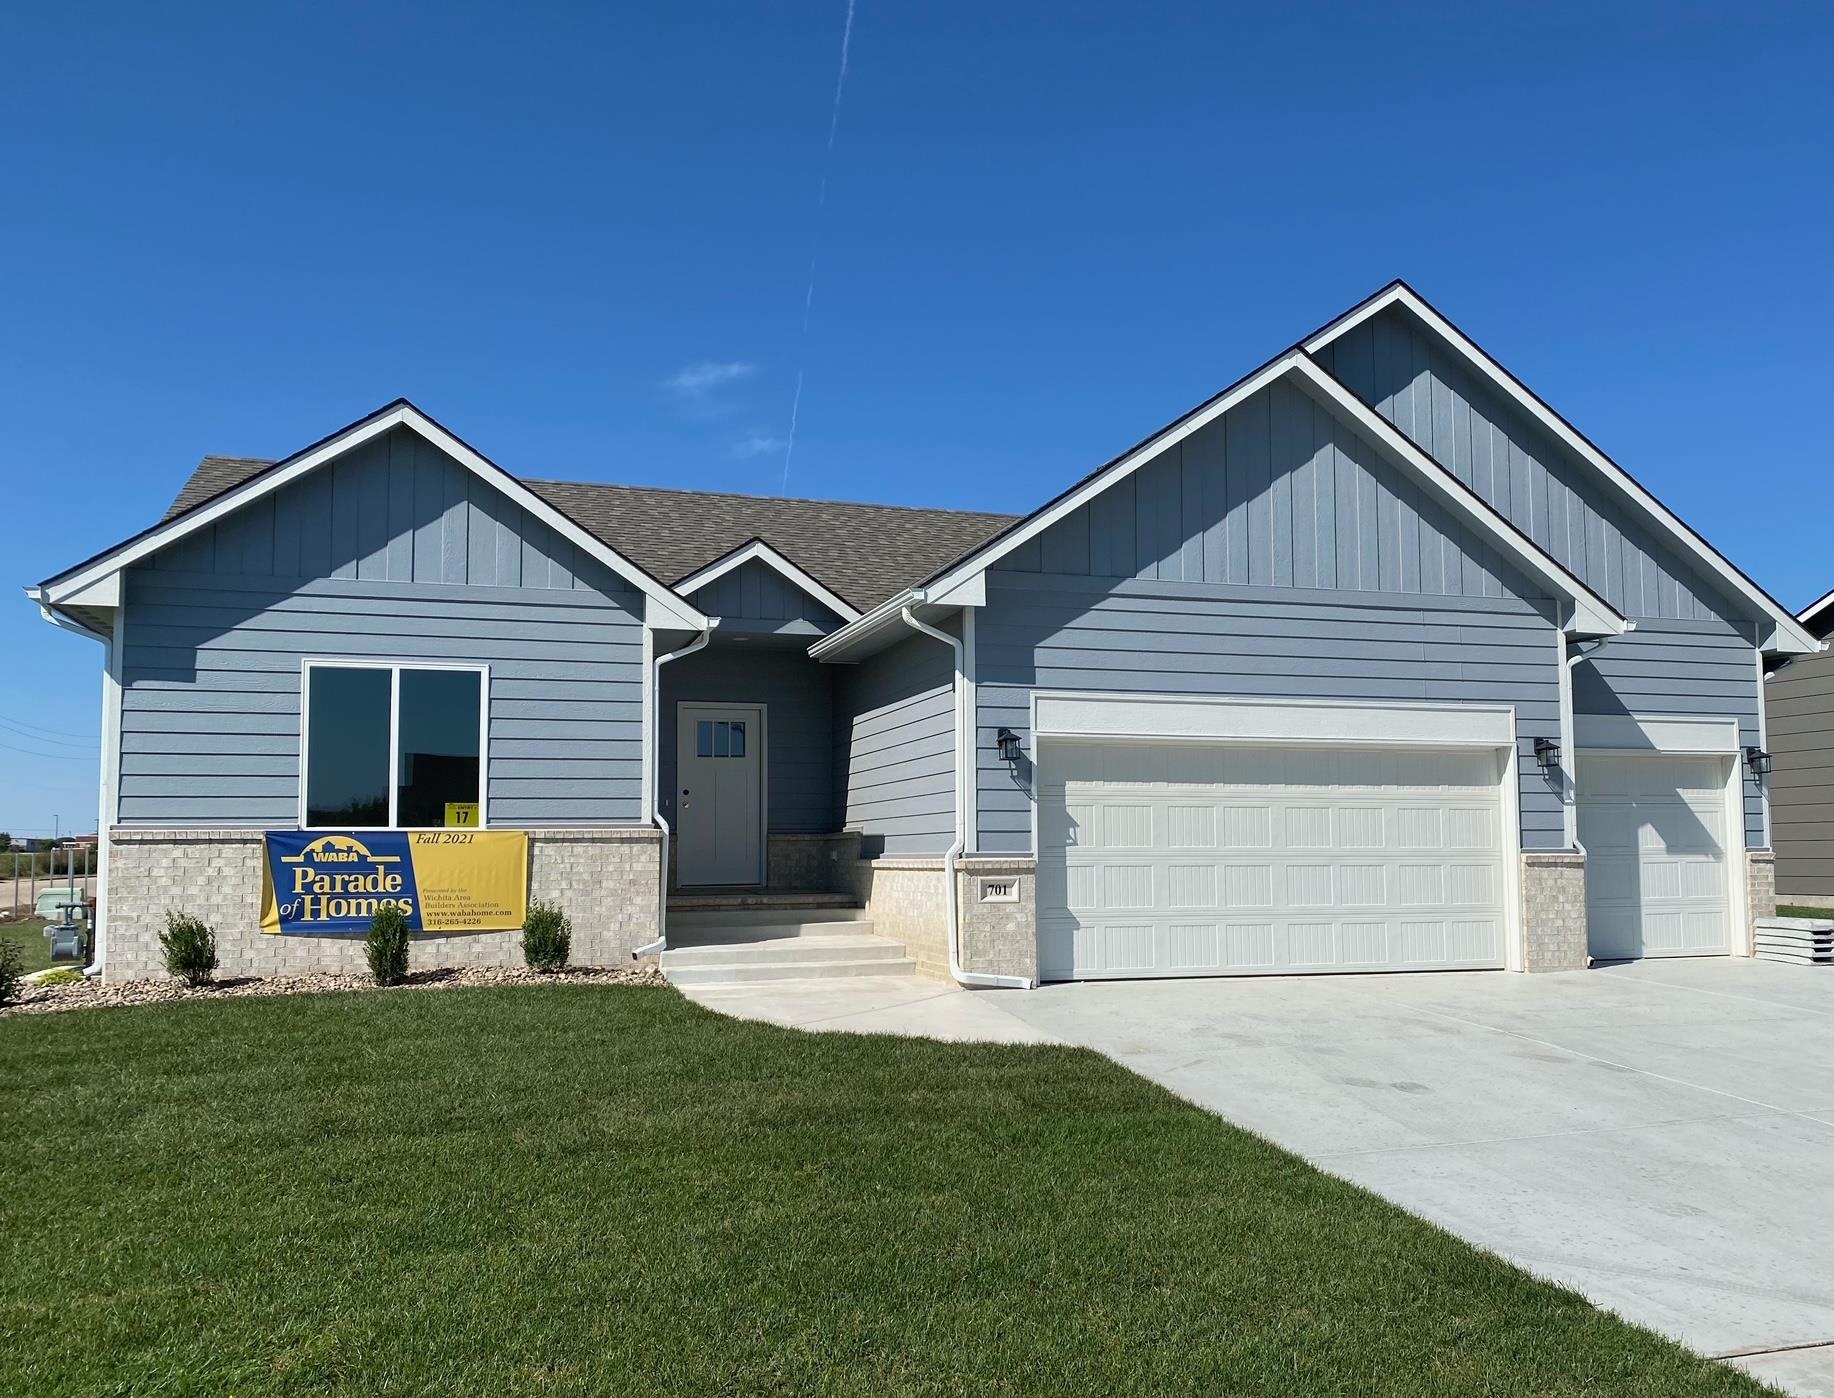 New Model Home!  Come check out our New Lil' Davey Model Home in Clover Leaf Farms!  2nd Phase is Now Open and already Half Sold Out!  Hurry before we are out of lots AGAIN!